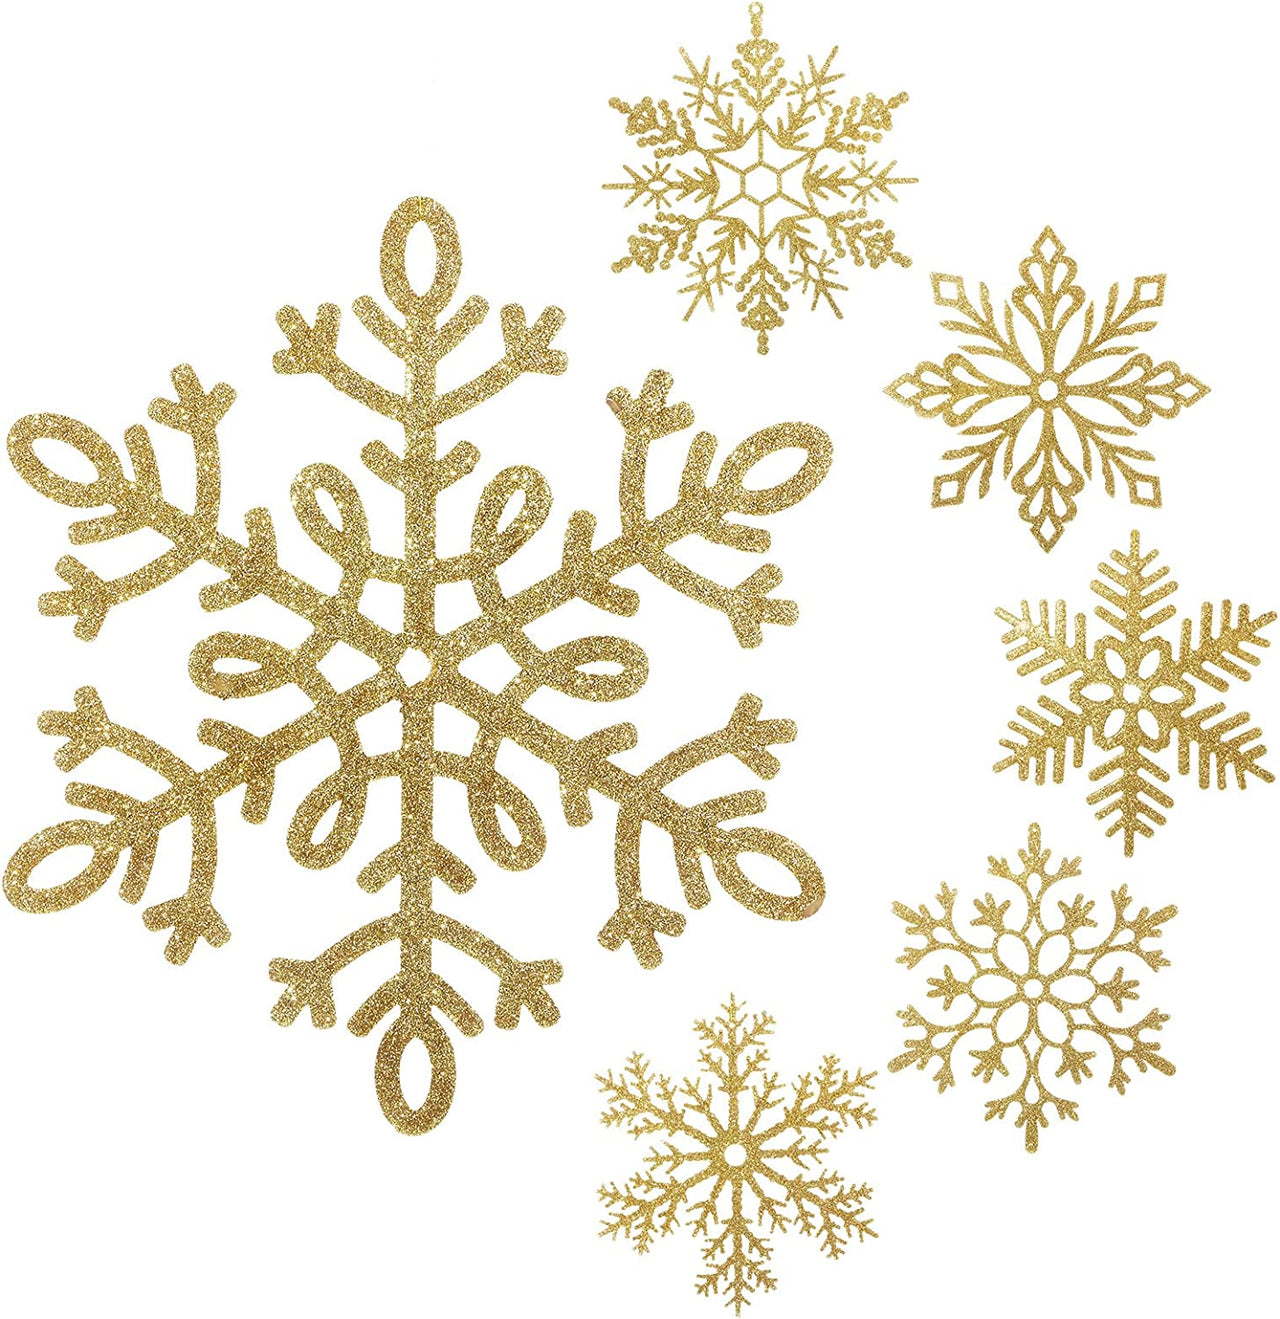 12 Pack Large Snowflakes Ornaments 12” Giant Glitter Decorative Hanging Snowflakes Plastic Oversized Christmas Snowflake Decorations with 164 Ft Nylon Thread for Indoor Outdoor Decor